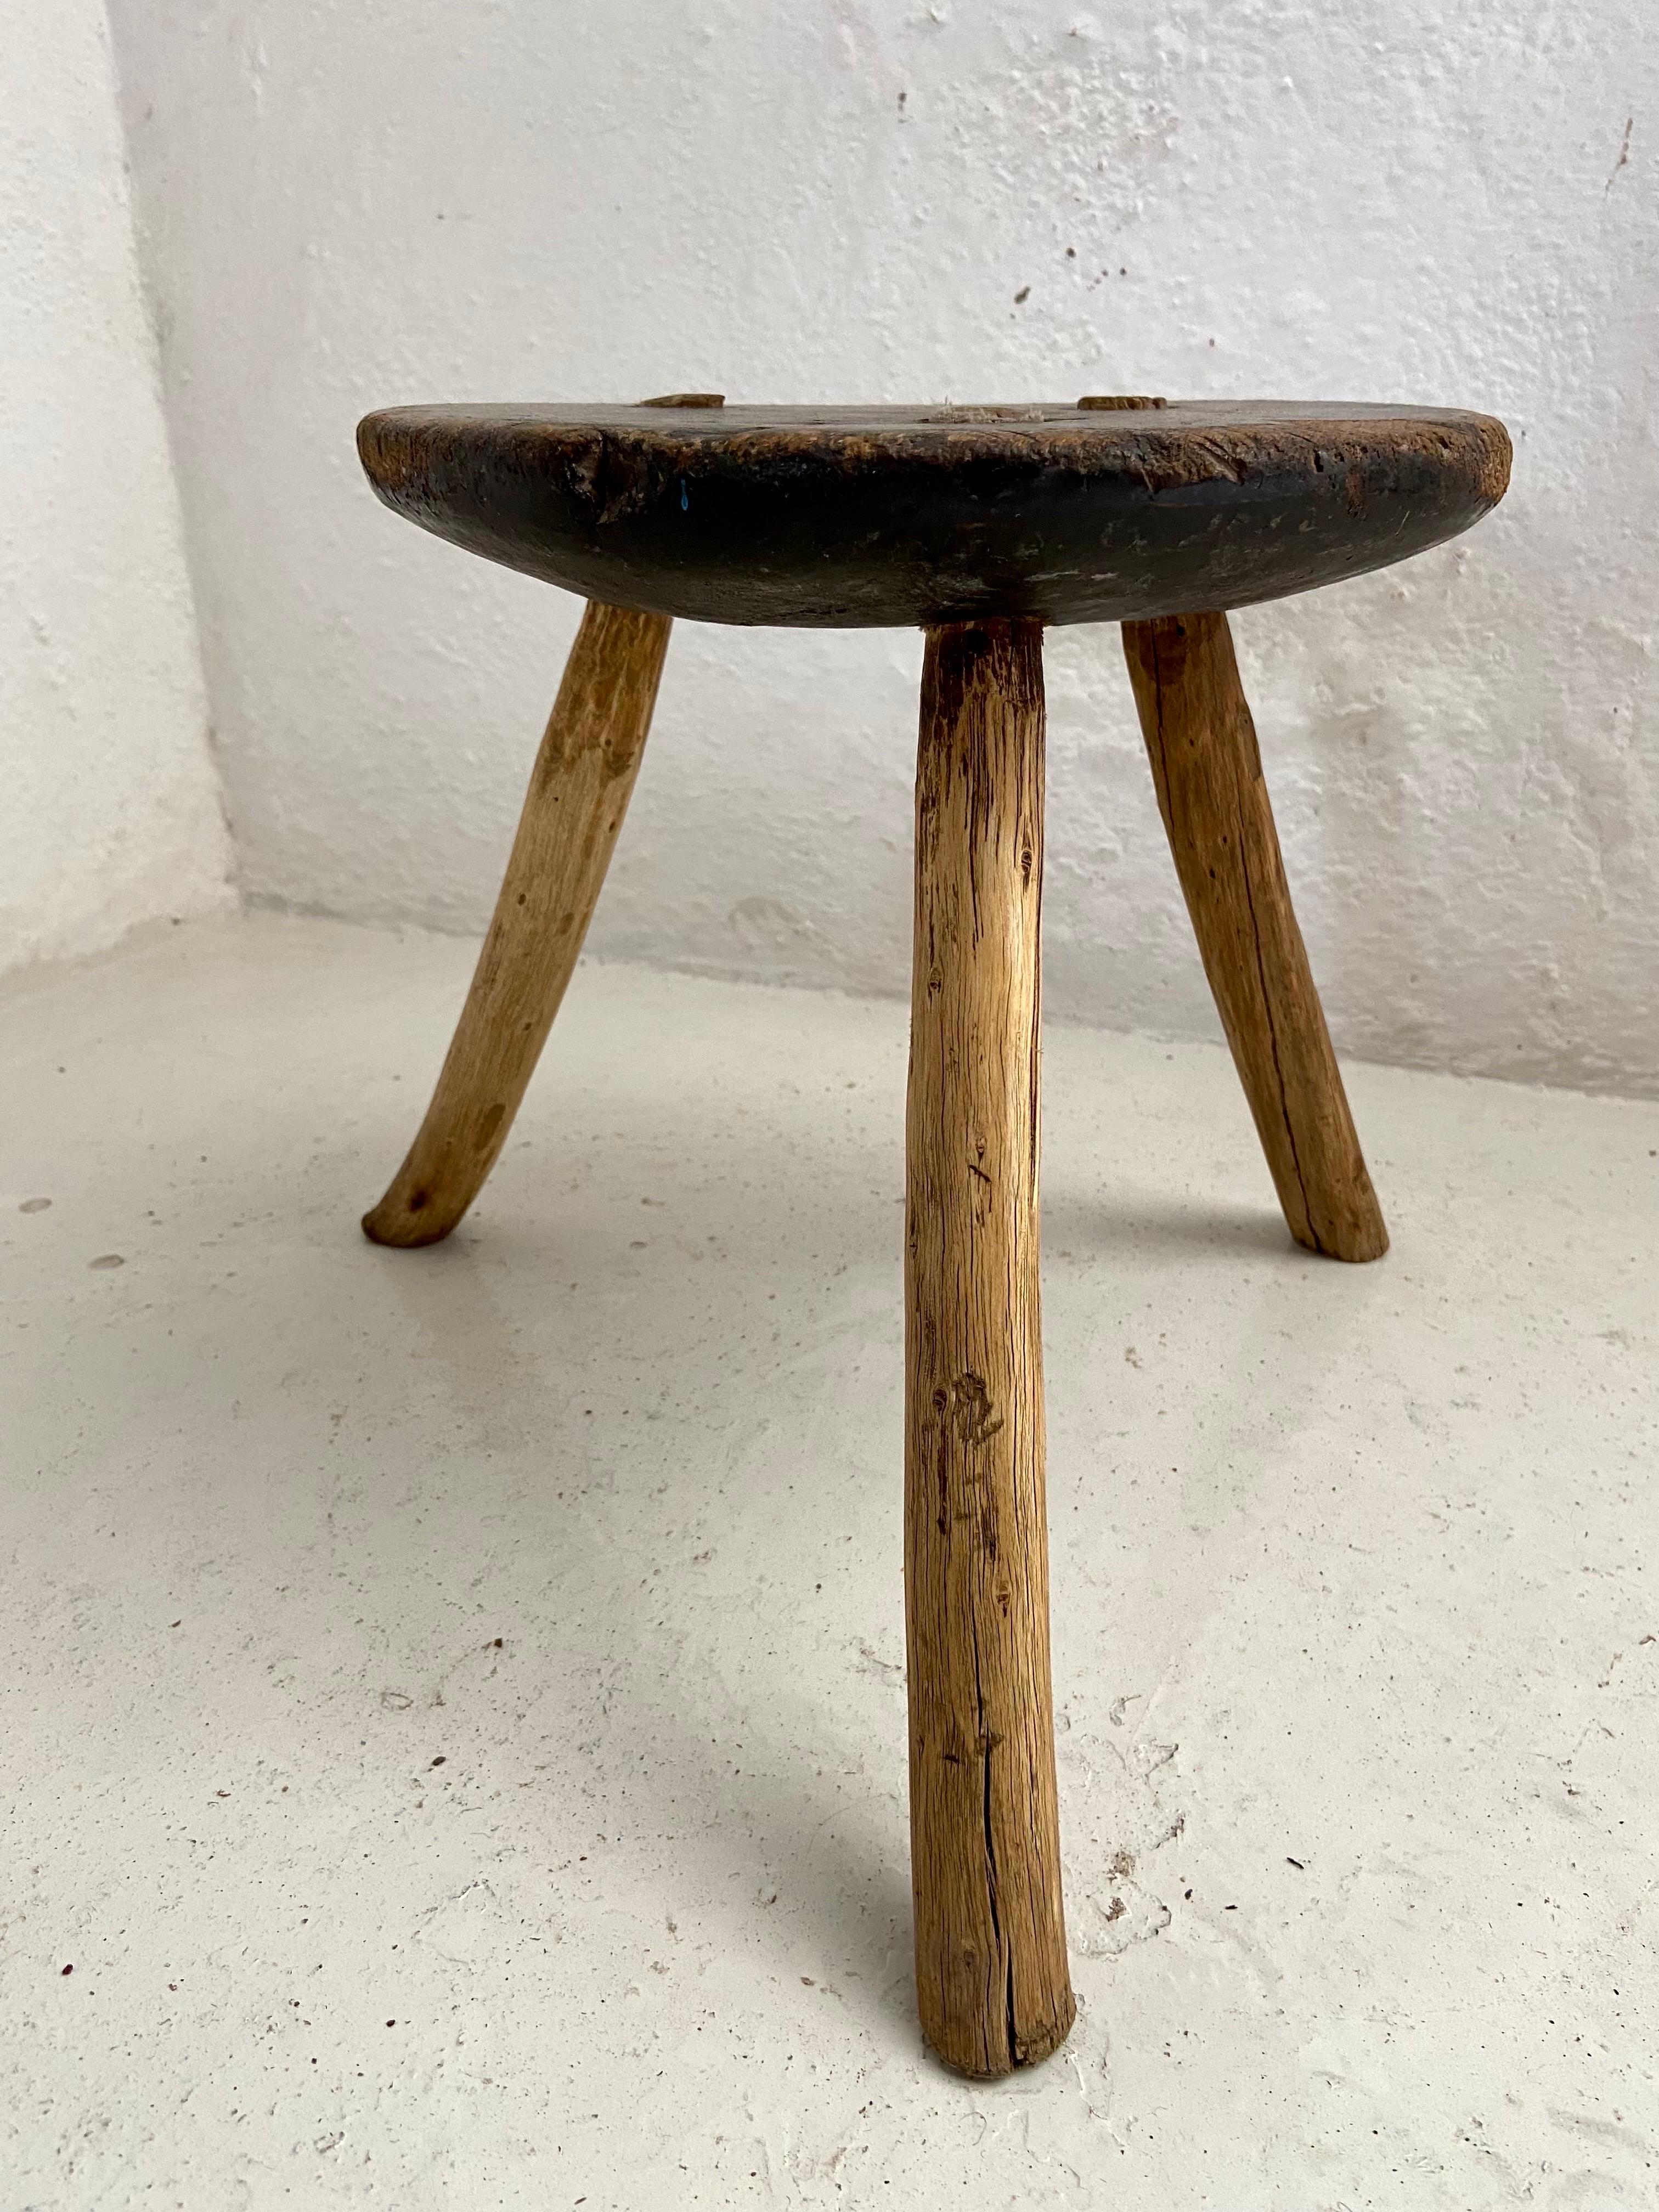 Rare hardwood stool from the 20's or 30´s from the high desert area of Tierra Blanca, Guanajuato, Mexico. All original legs and seat.